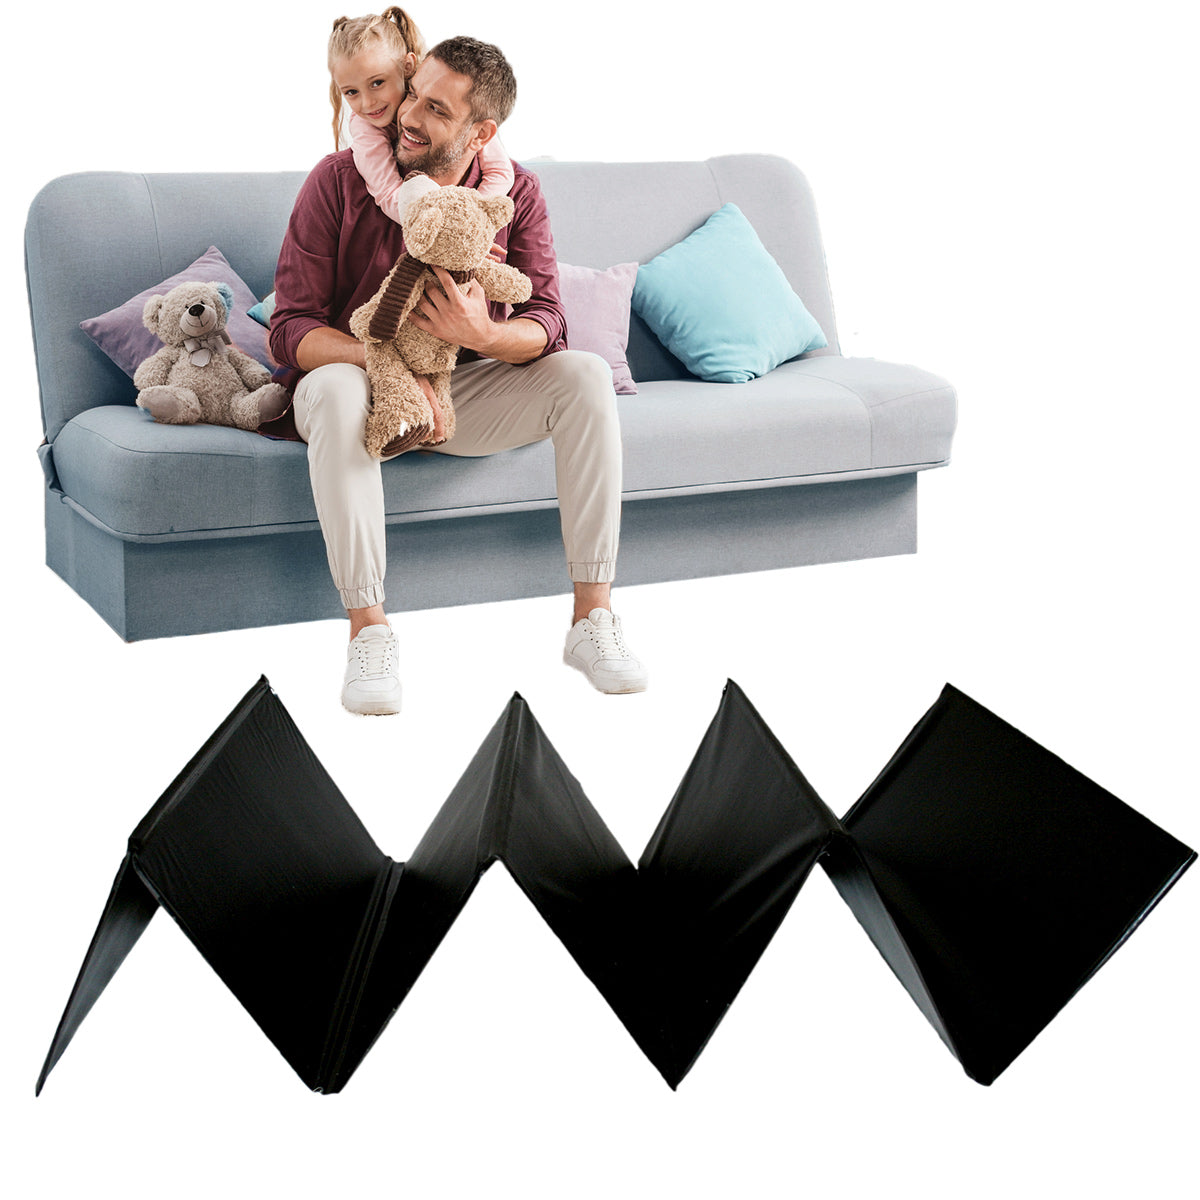  LAMINET Deluxe Extra Thick Sagging Furniture Cushion Support  Insert, Seat Saver, New and Improved, Extend The Life of Your Sofa